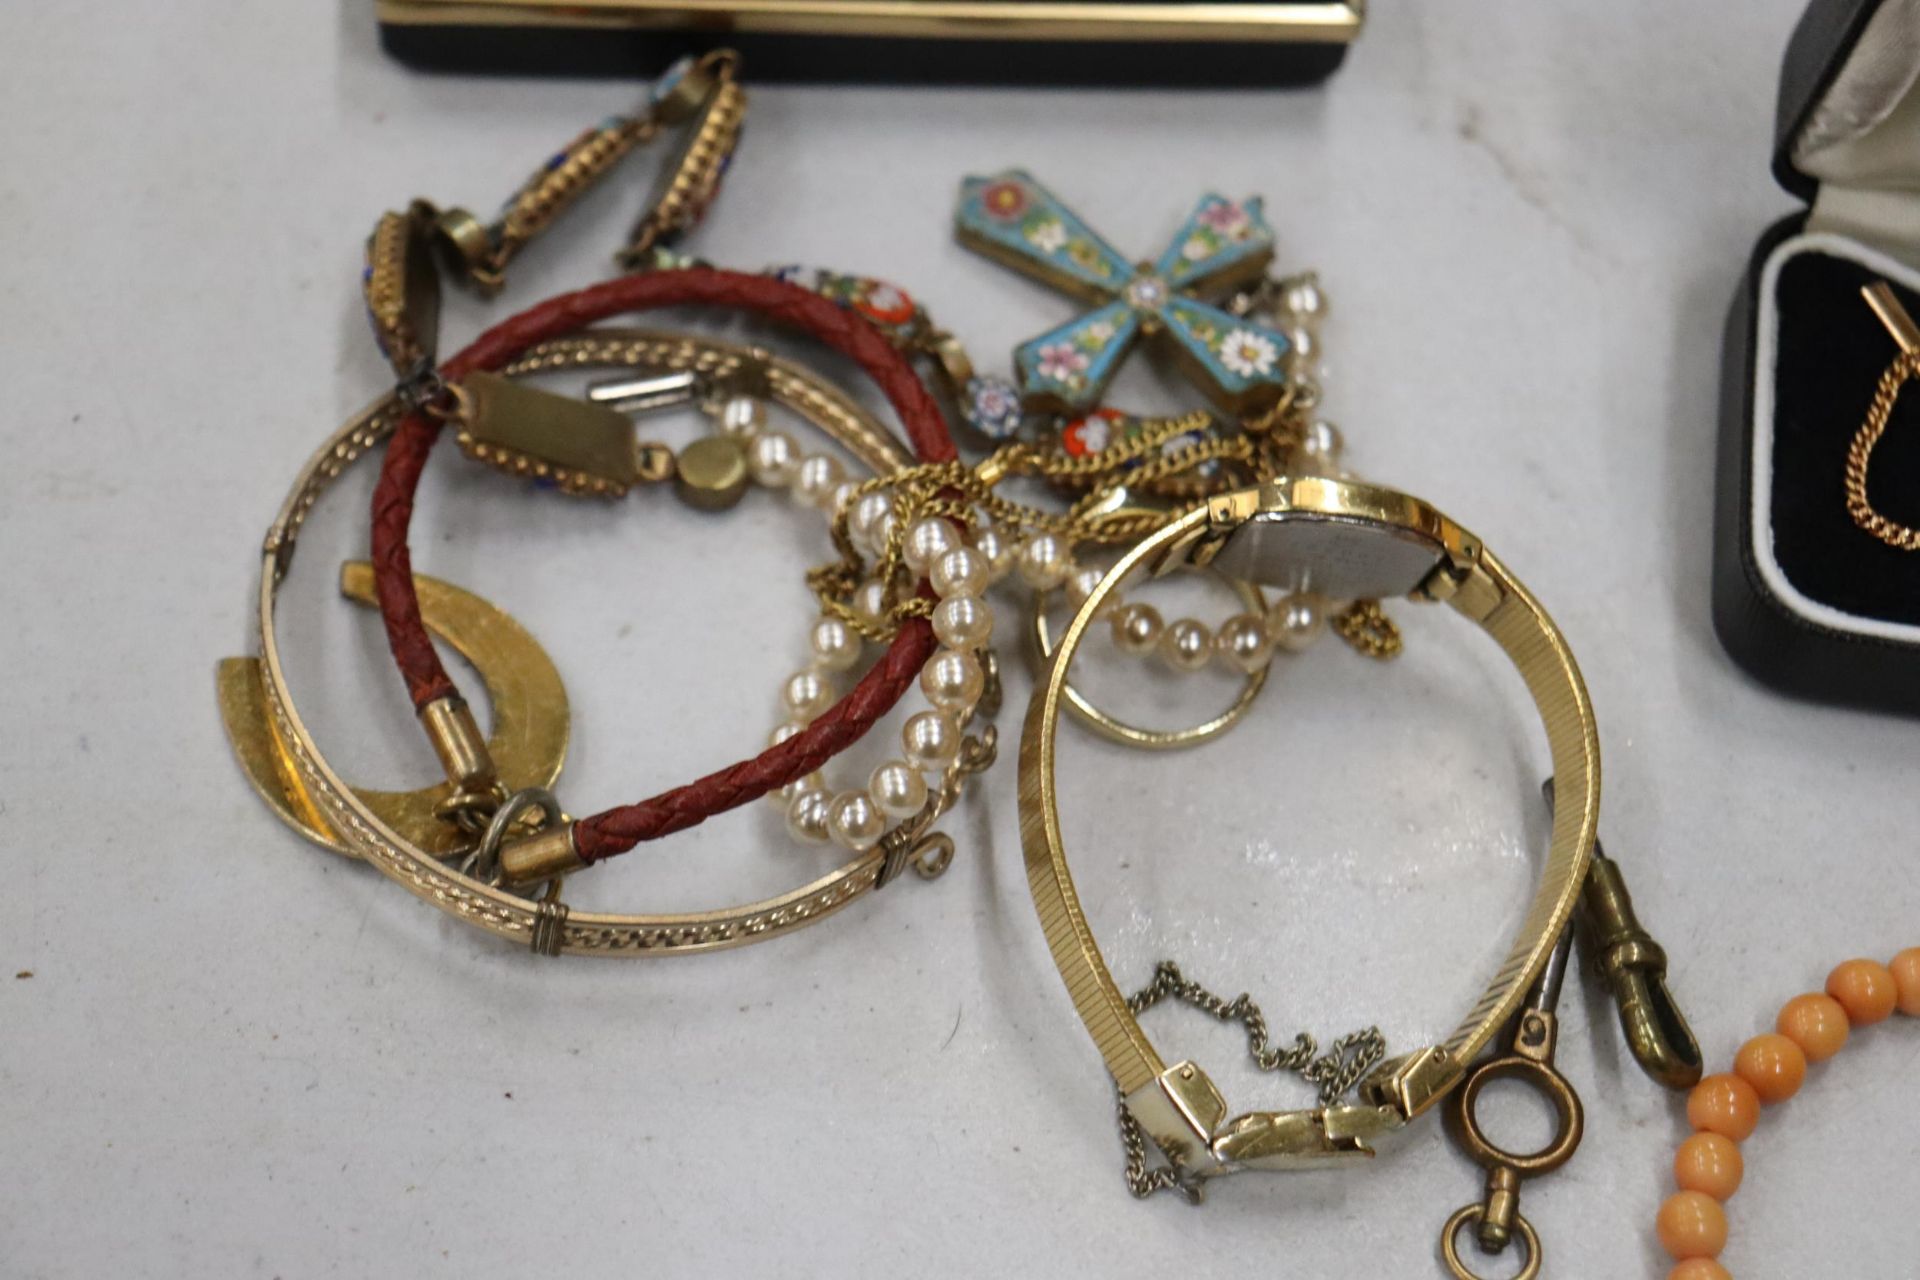 A QUANTITY OF COSTUME JEWELLERY TO INCLUDE BRACELETS, BOXED CUFFLINKS, A WATCH, PENKNIFE, ETC - Image 7 of 9